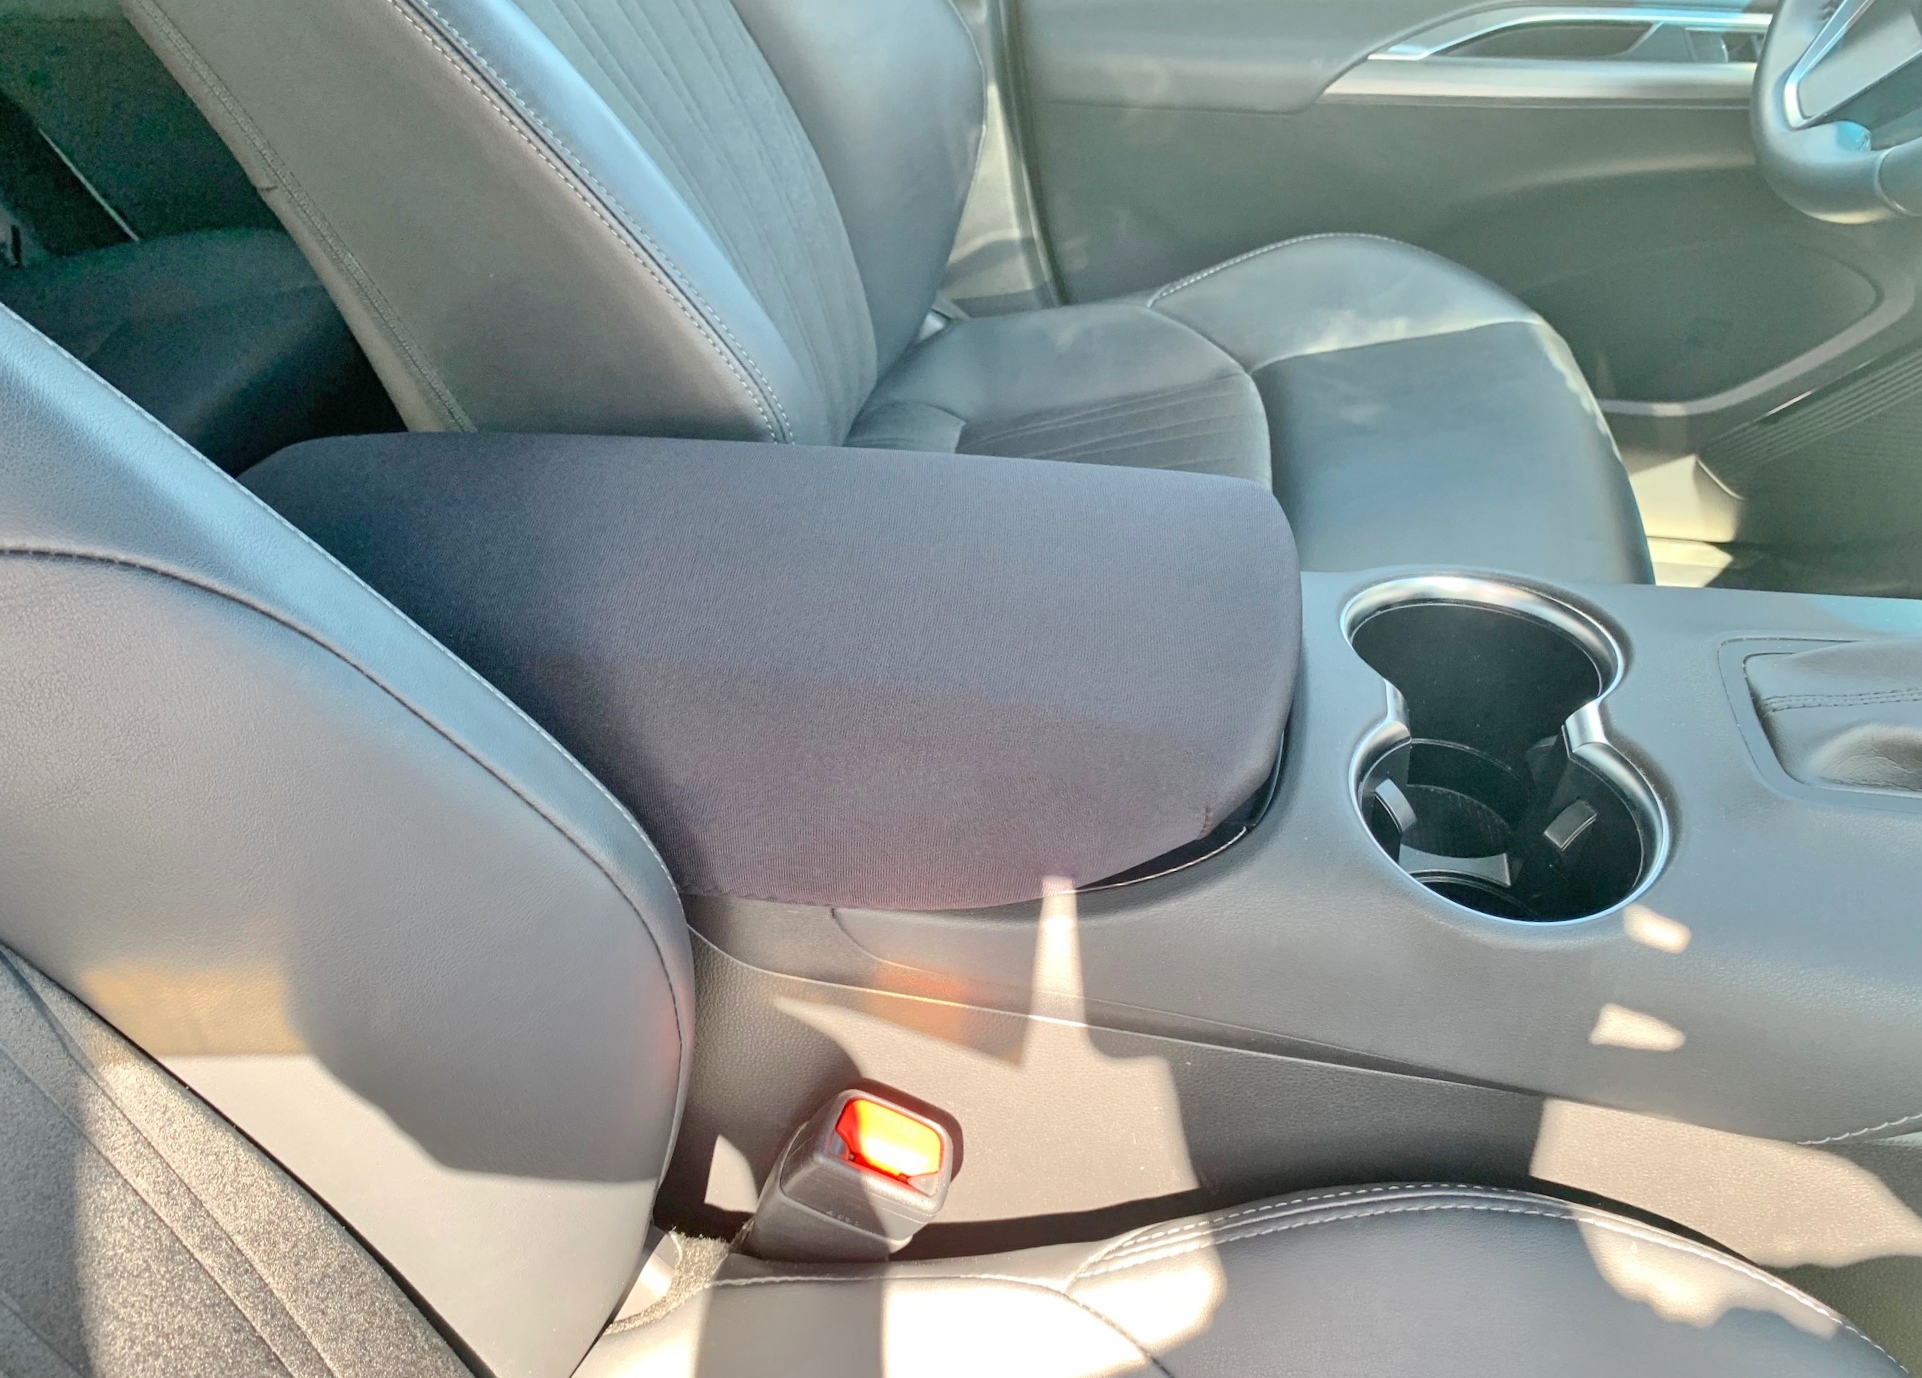 Buy Neoprene Center Console Armrest Cover - Fits the Toyota Venza 2021-2022